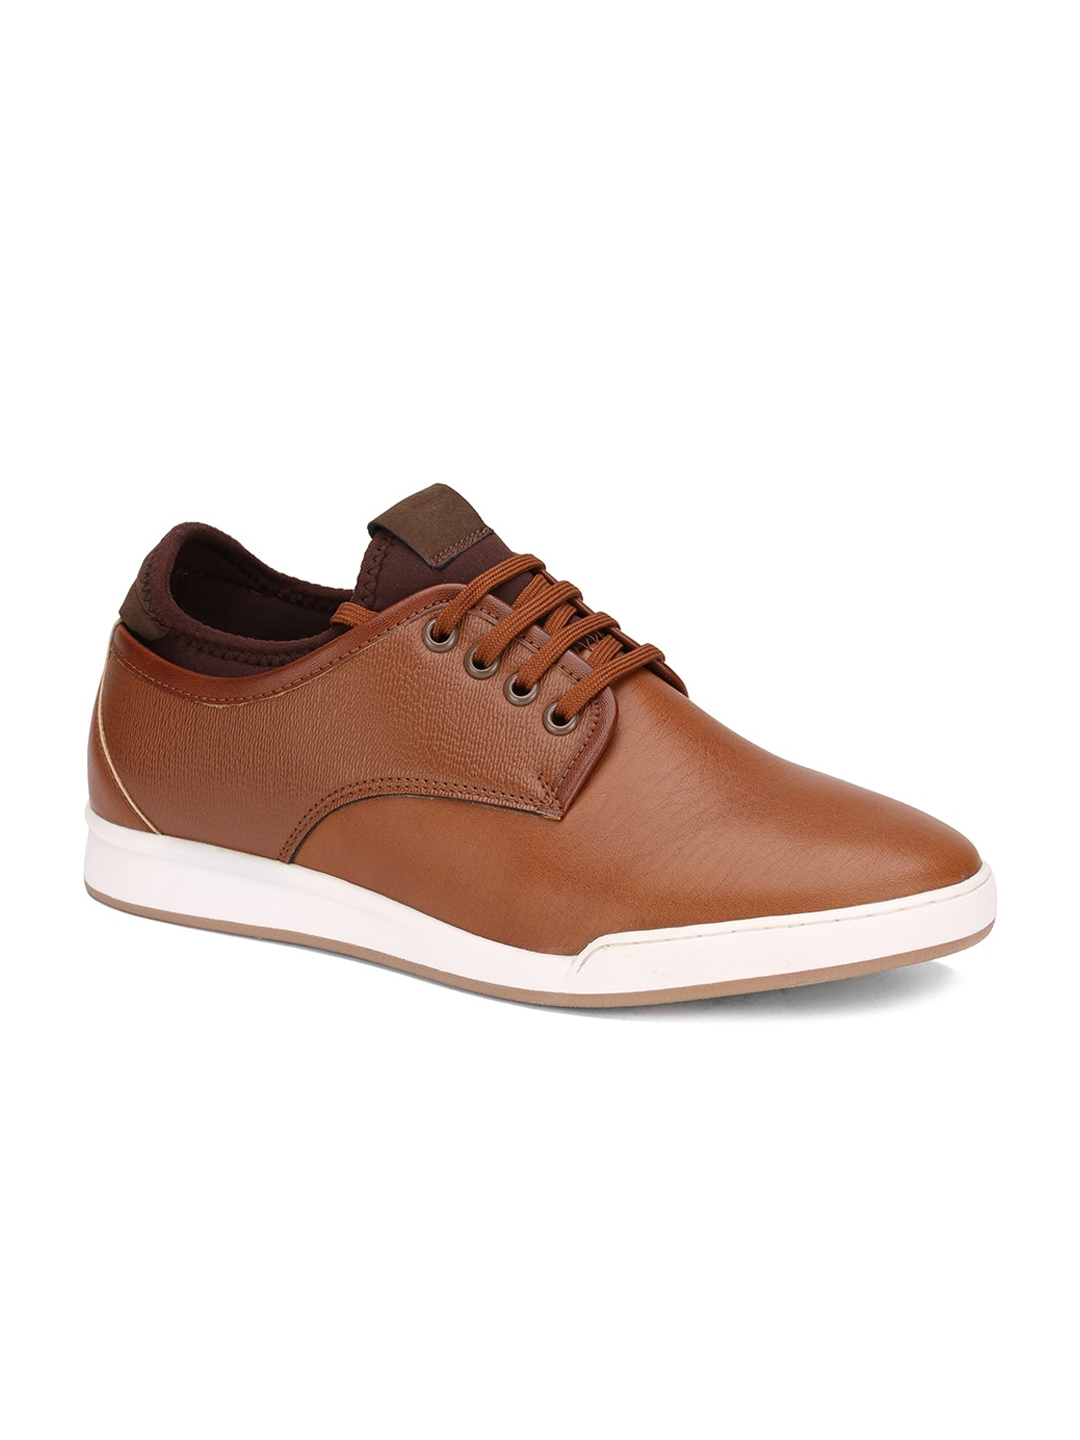 Bata Men Brown Solid PU Lace up Sneakers